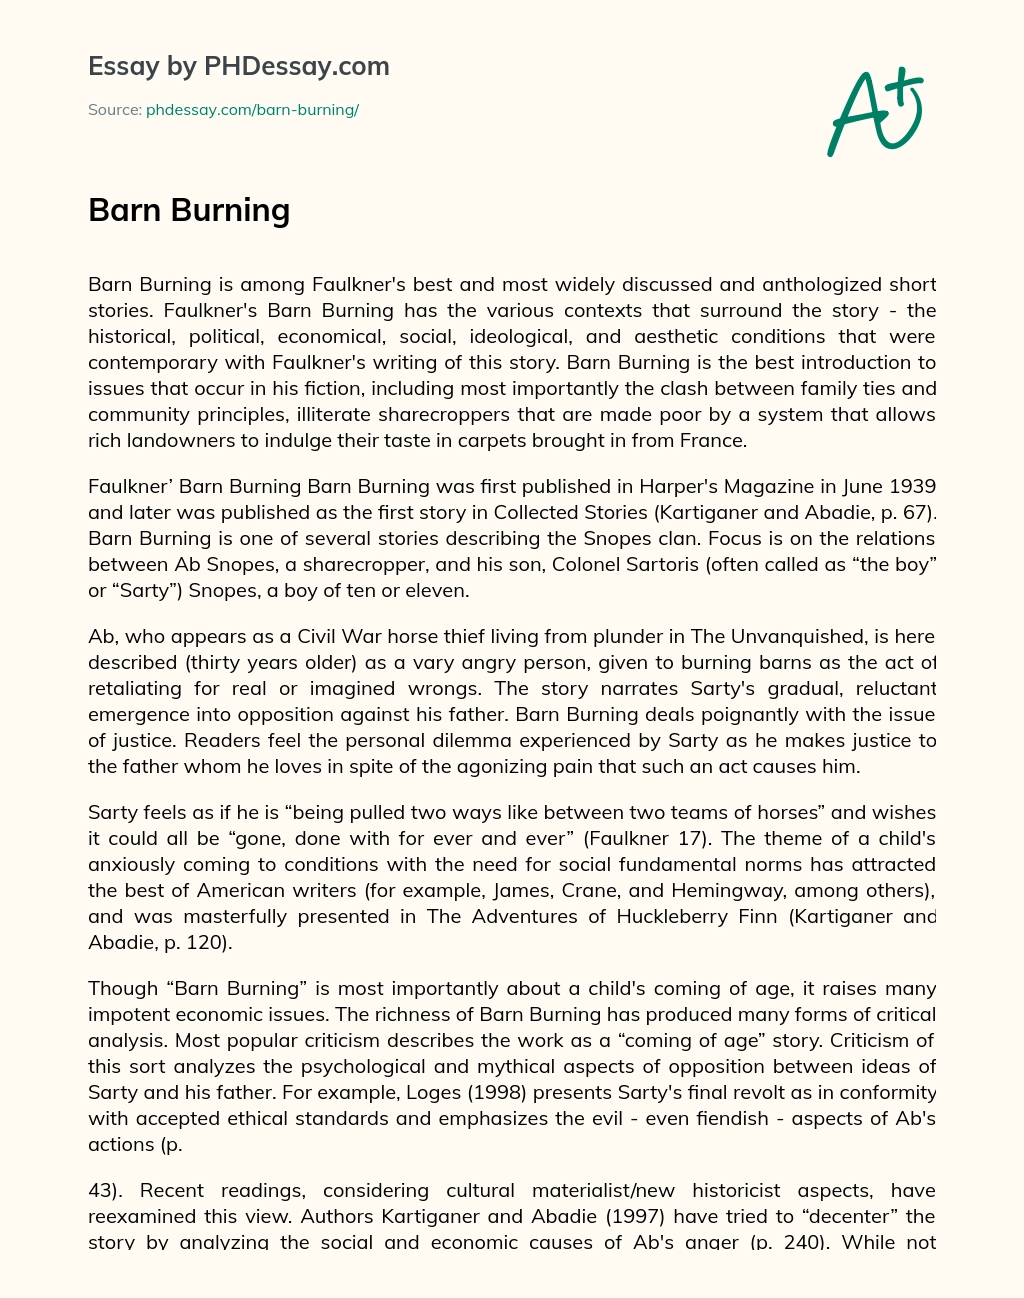 Реферат: Barn Burning Essay Research Paper Use of